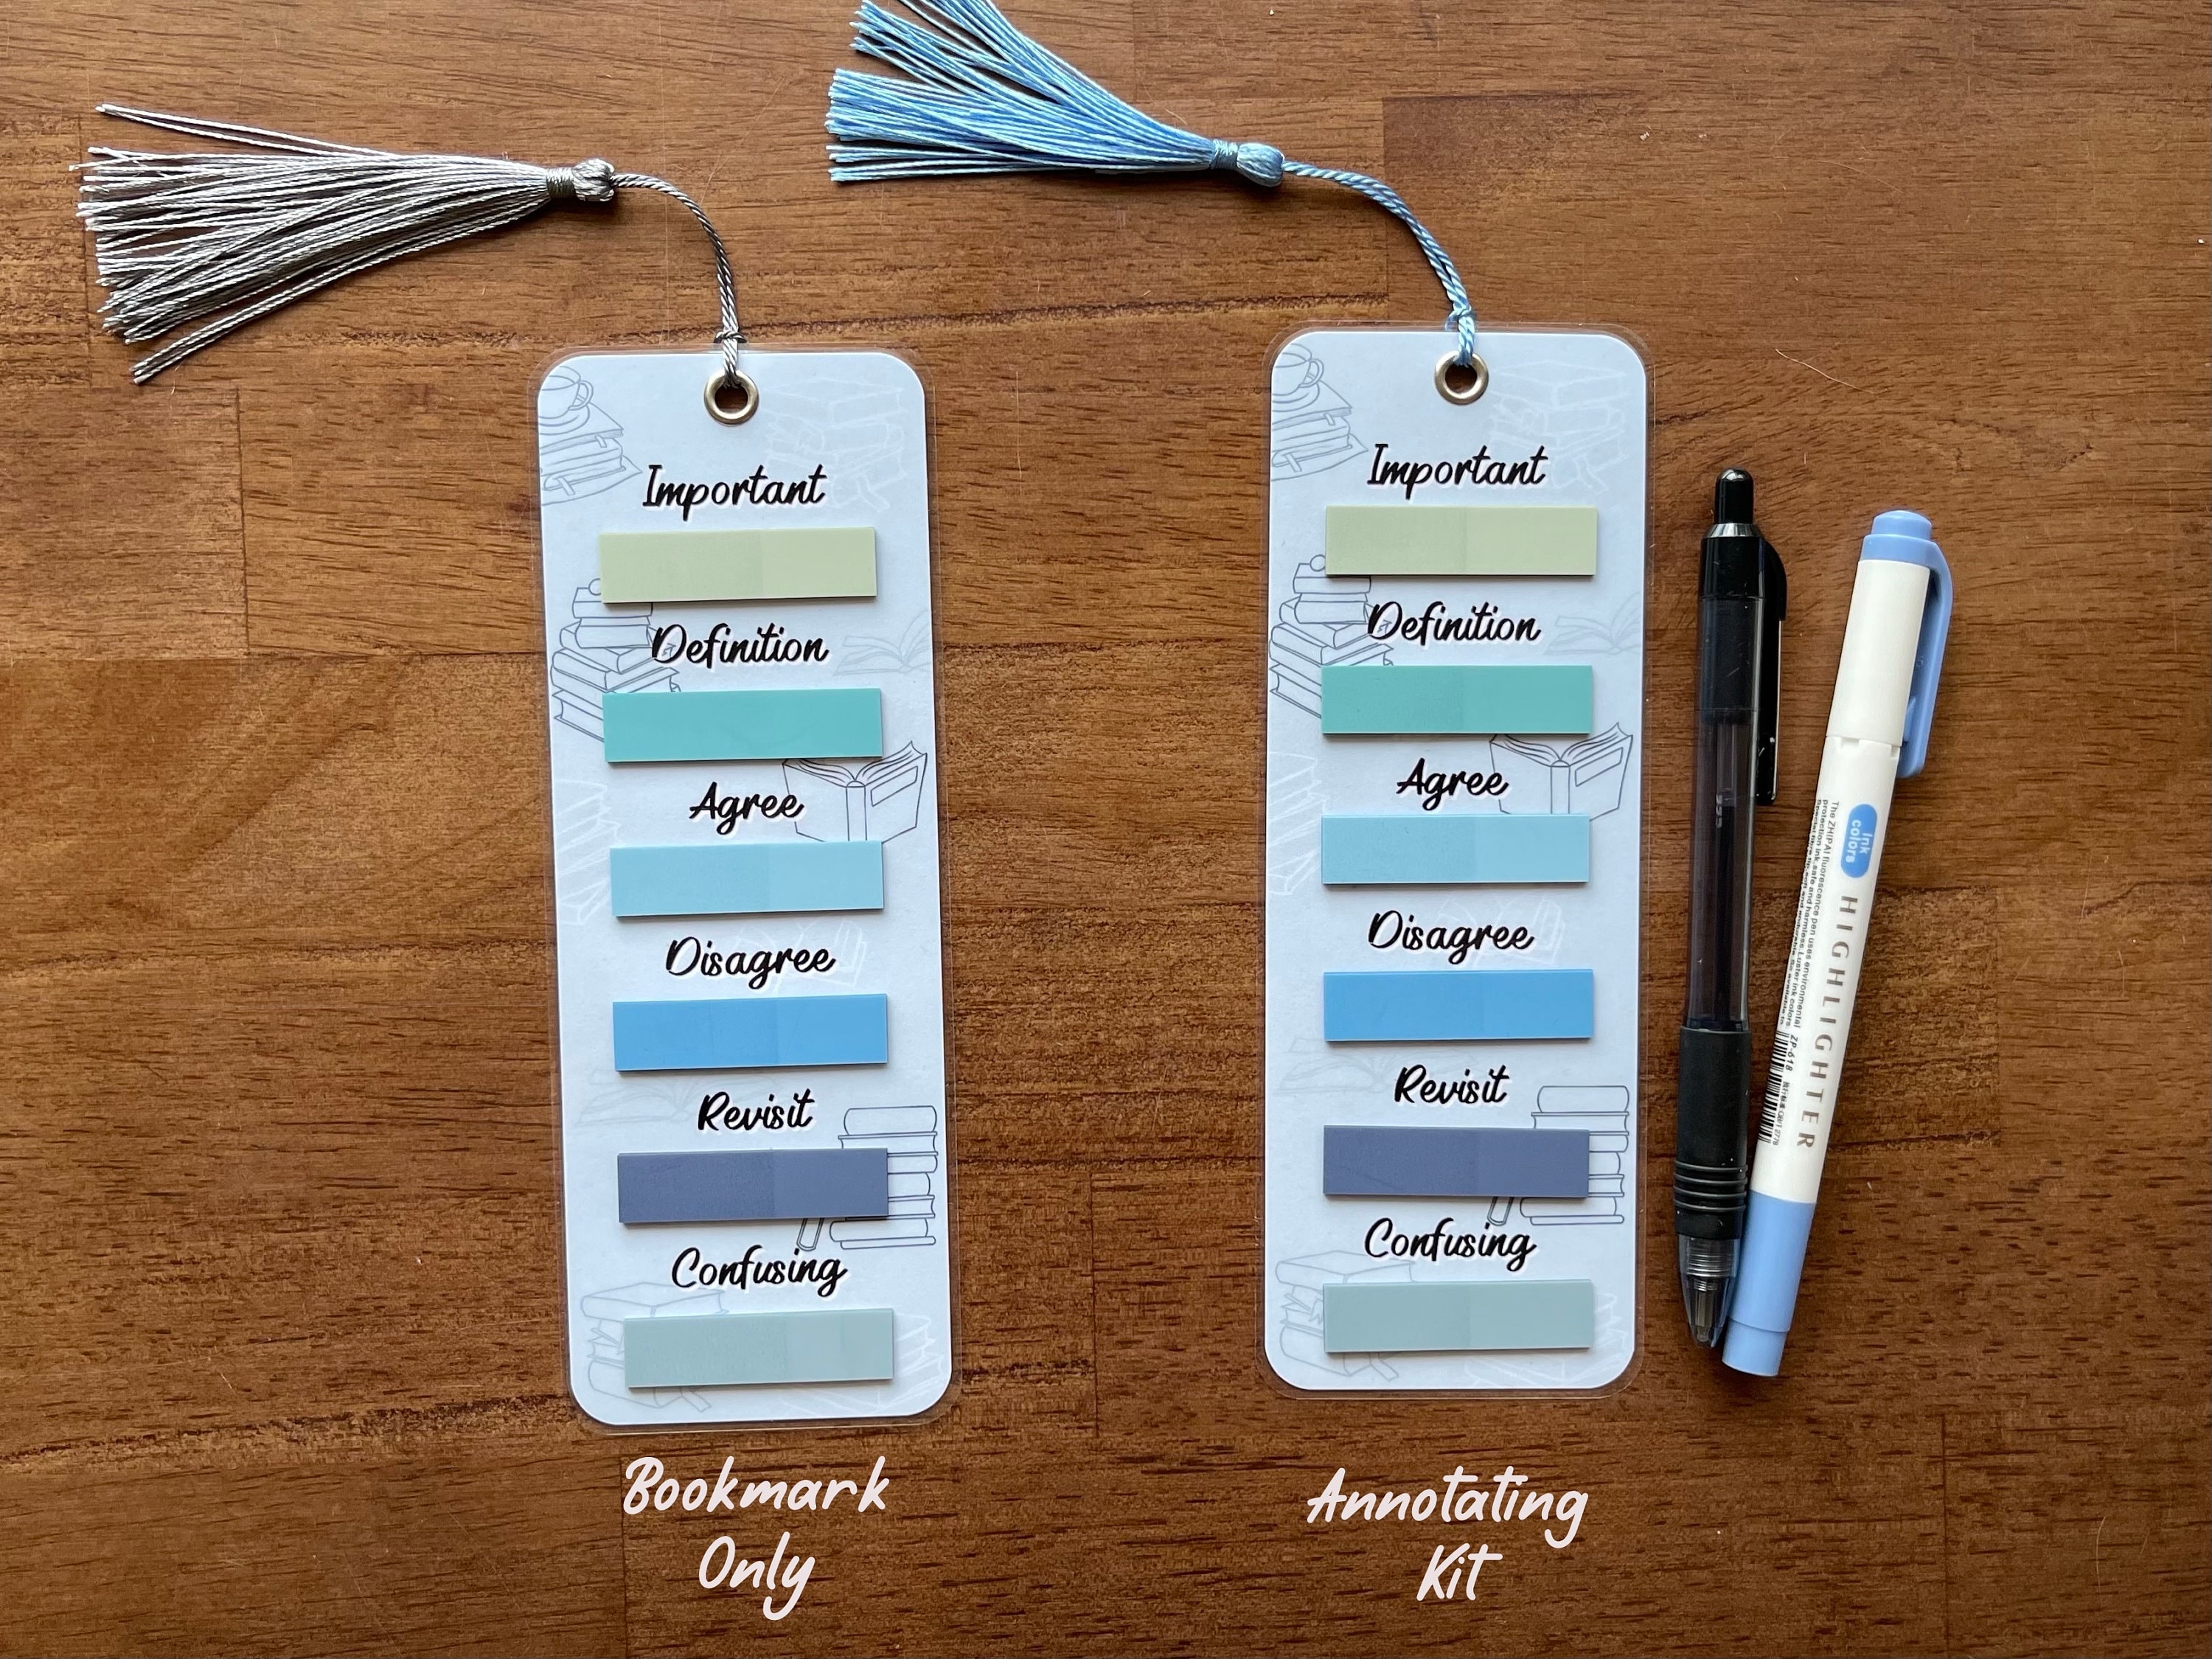 Annotation Bookmark With Tabs Kit, Book Annotating Kit Supplies, Popular  Gifts for Her, Book Accessories, Reading Supplies 